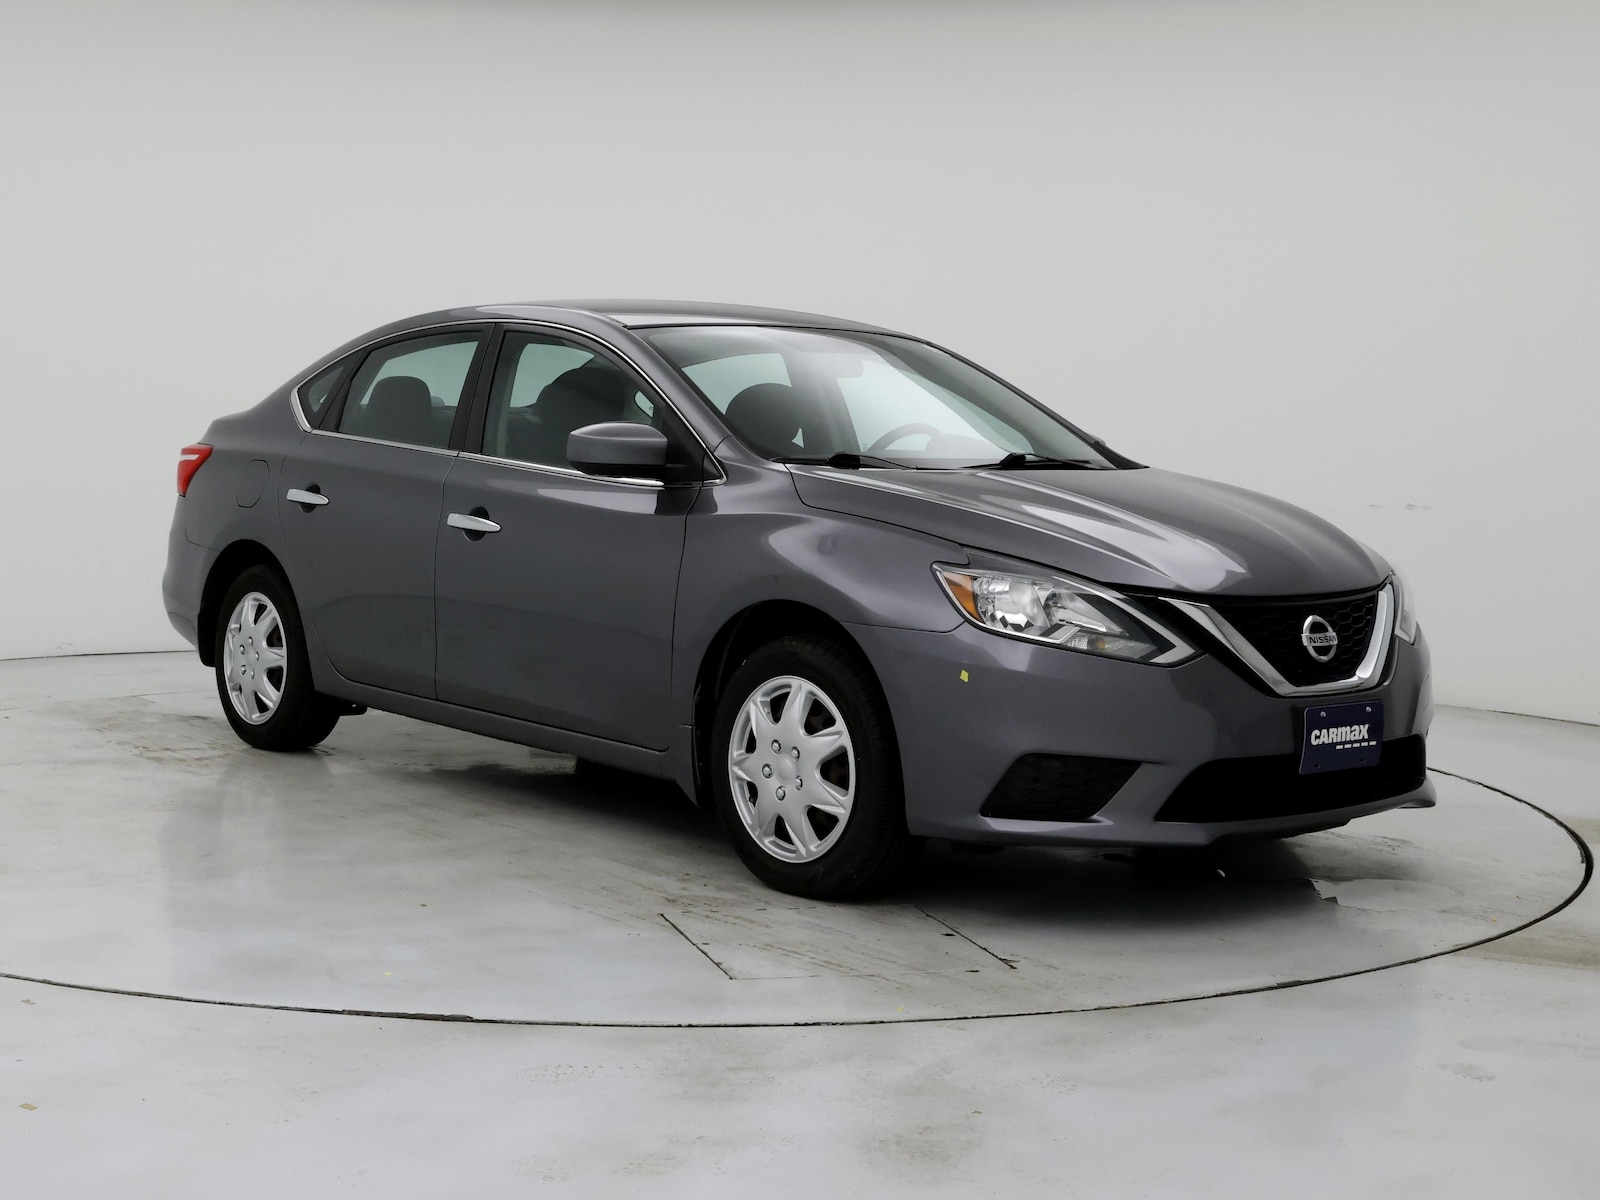 Used 2016 Nissan Sentra S with VIN 3N1AB7AP7GY271482 for sale in Spokane Valley, WA